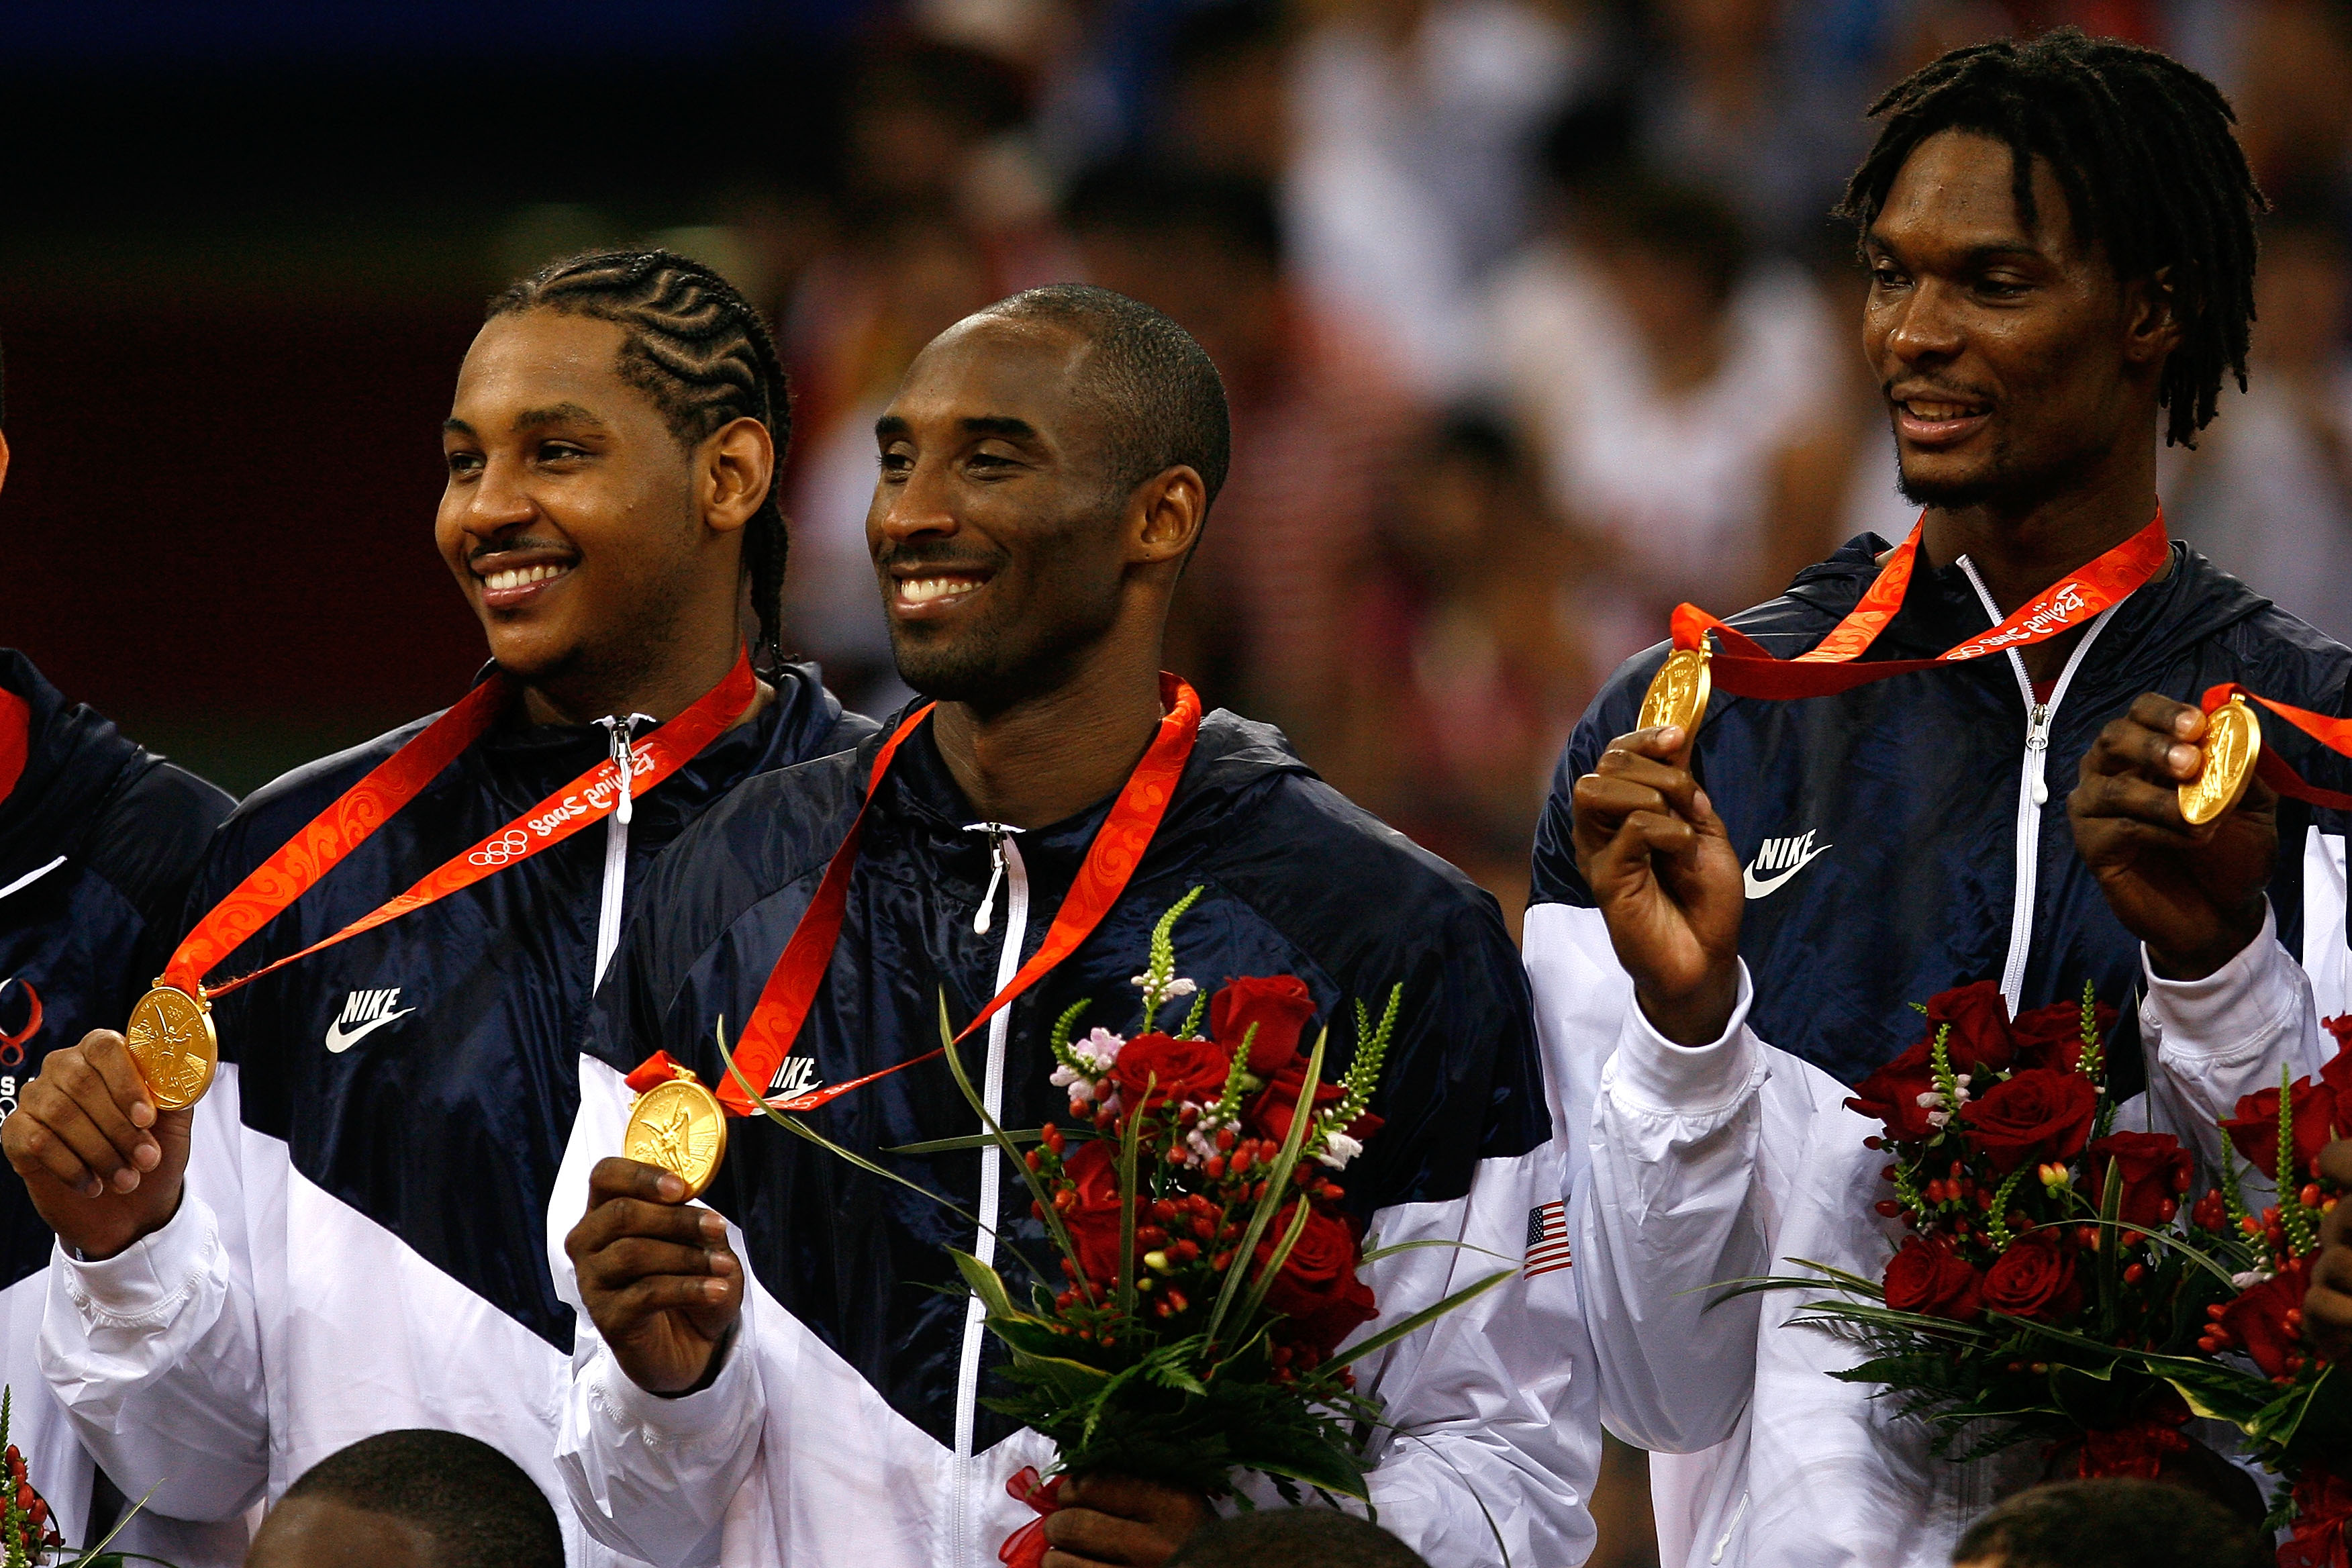 BEIJING - AUGUST 24:  (L-R) Carmelo Anthony, Kobe Bryant and Chris Bosh of the United States hold their gold medals after defeating Spain 118-107 in the gold medal game during Day 16 of the Beijing 2008 Olympic Games at the Beijing Olympic Basketball Gymn